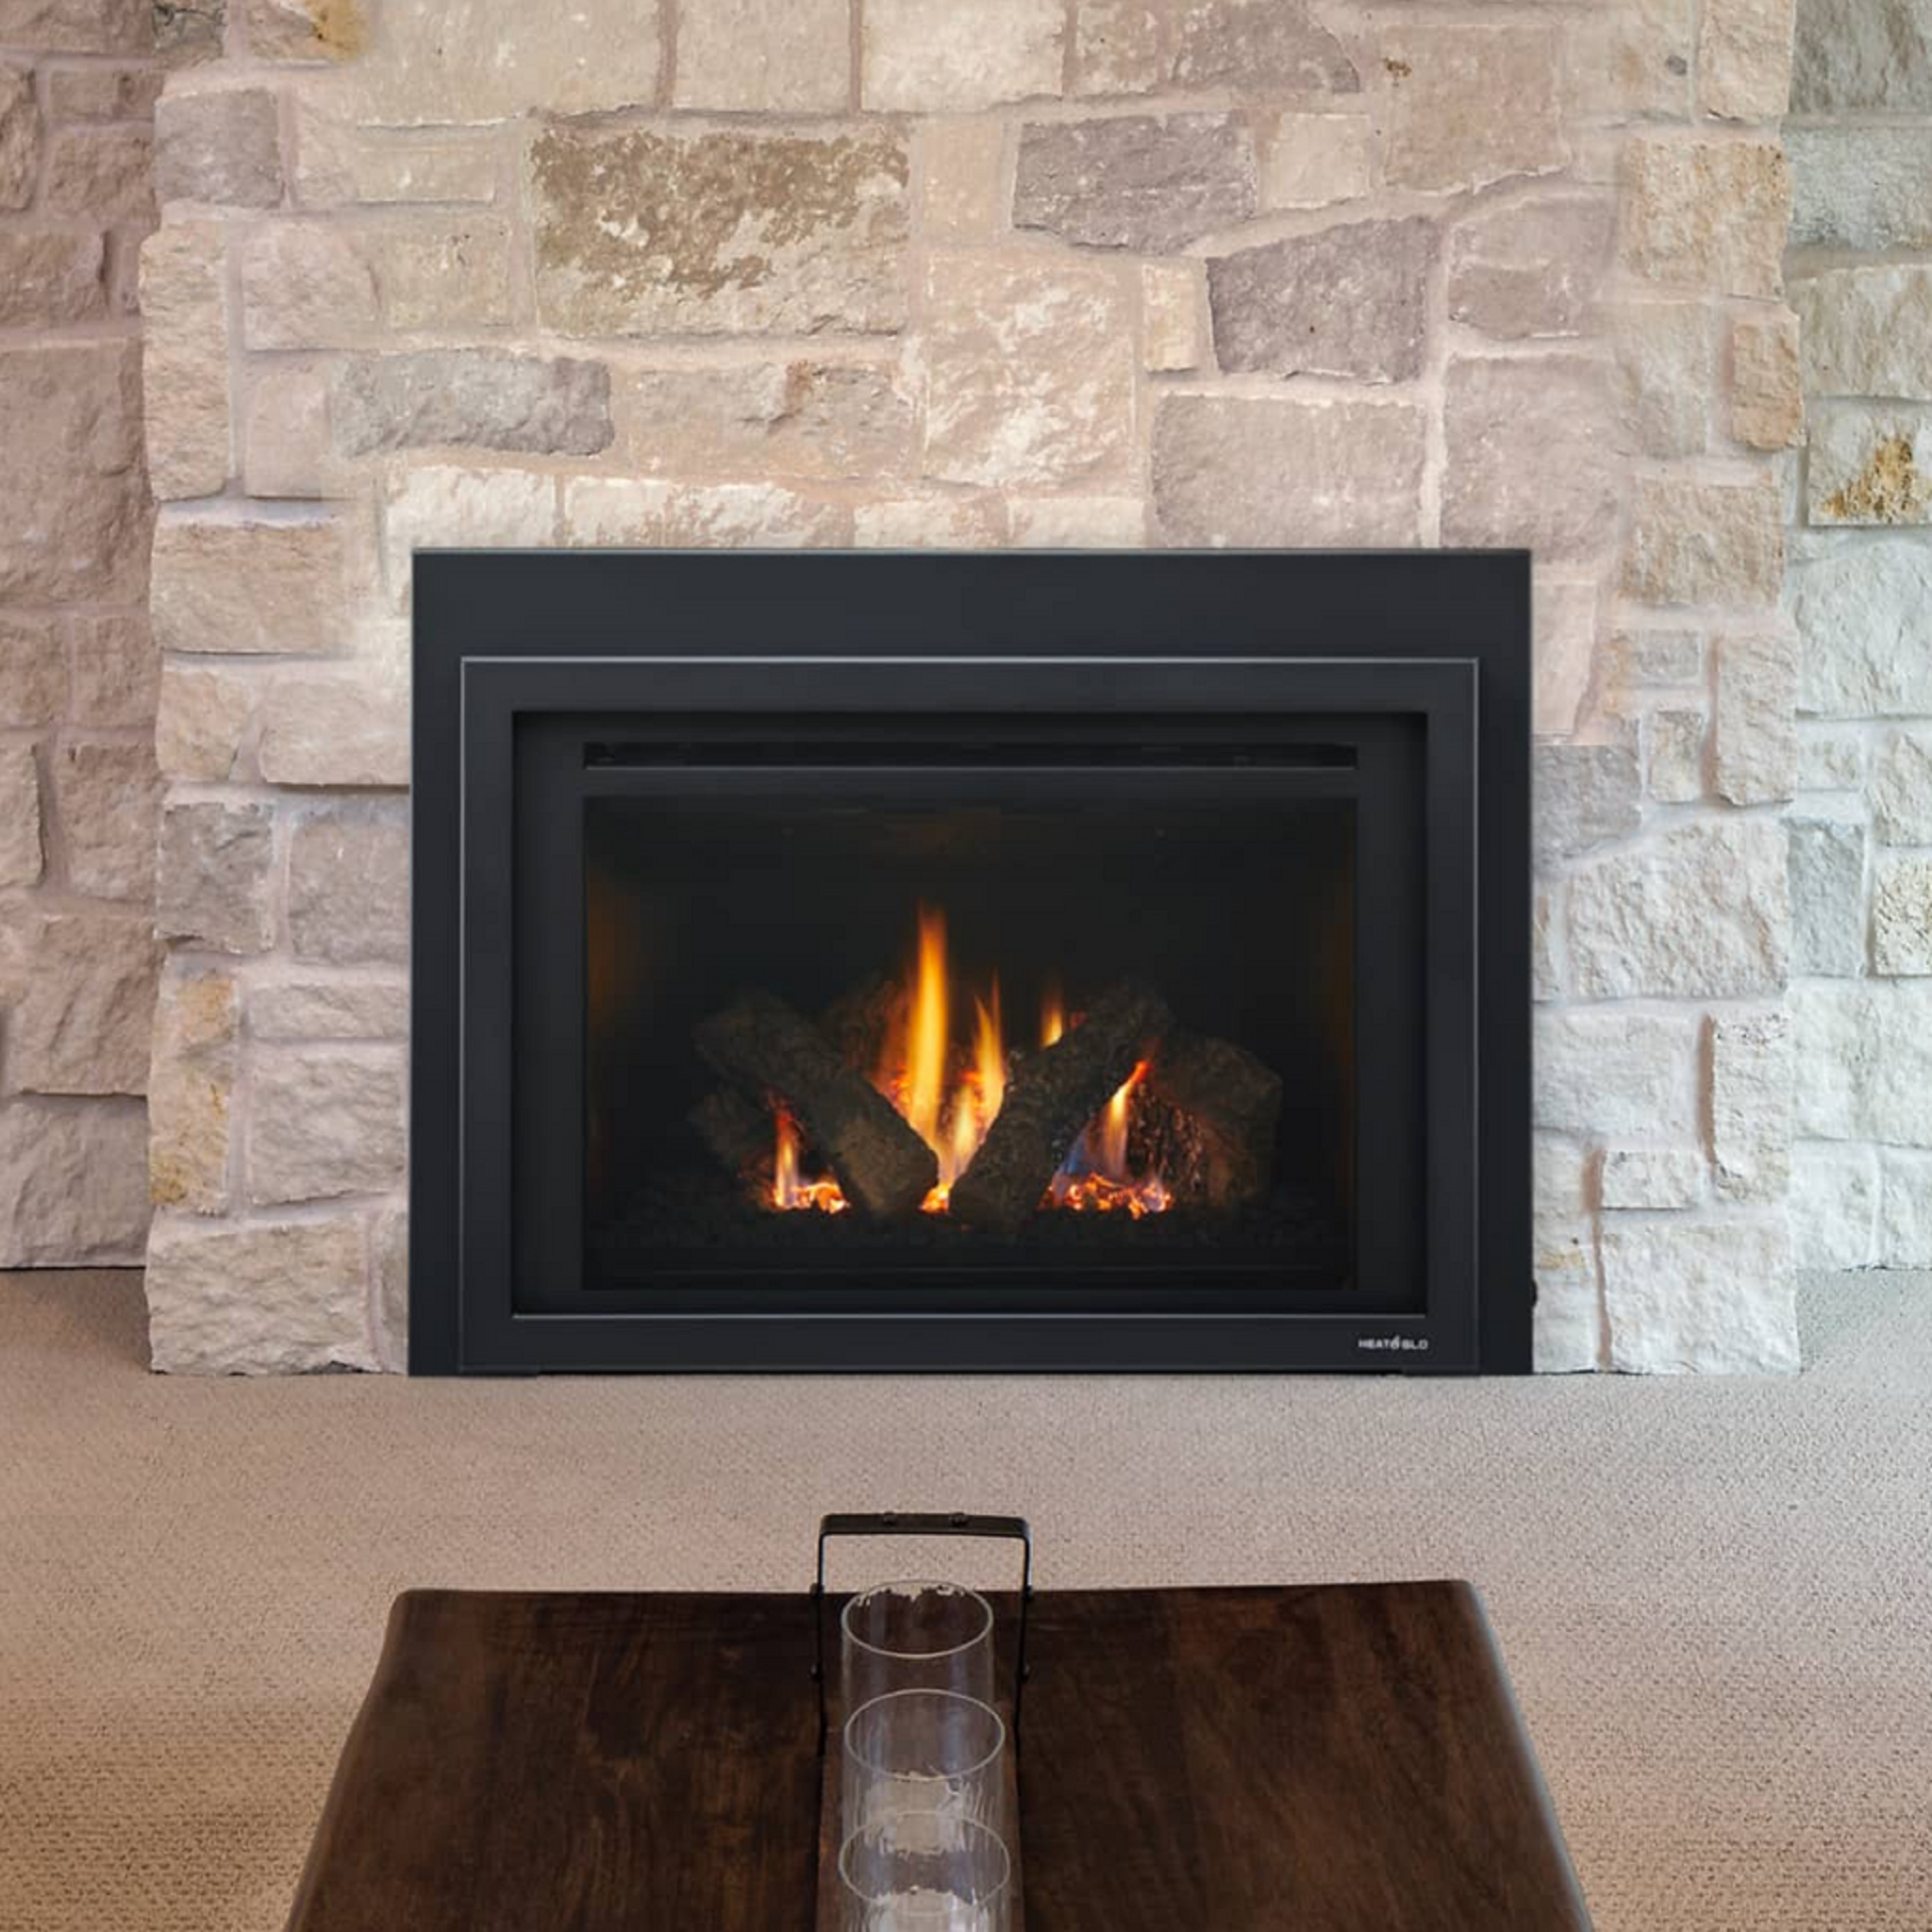 Gas Fireplaces Offer Efficient Heating Choices